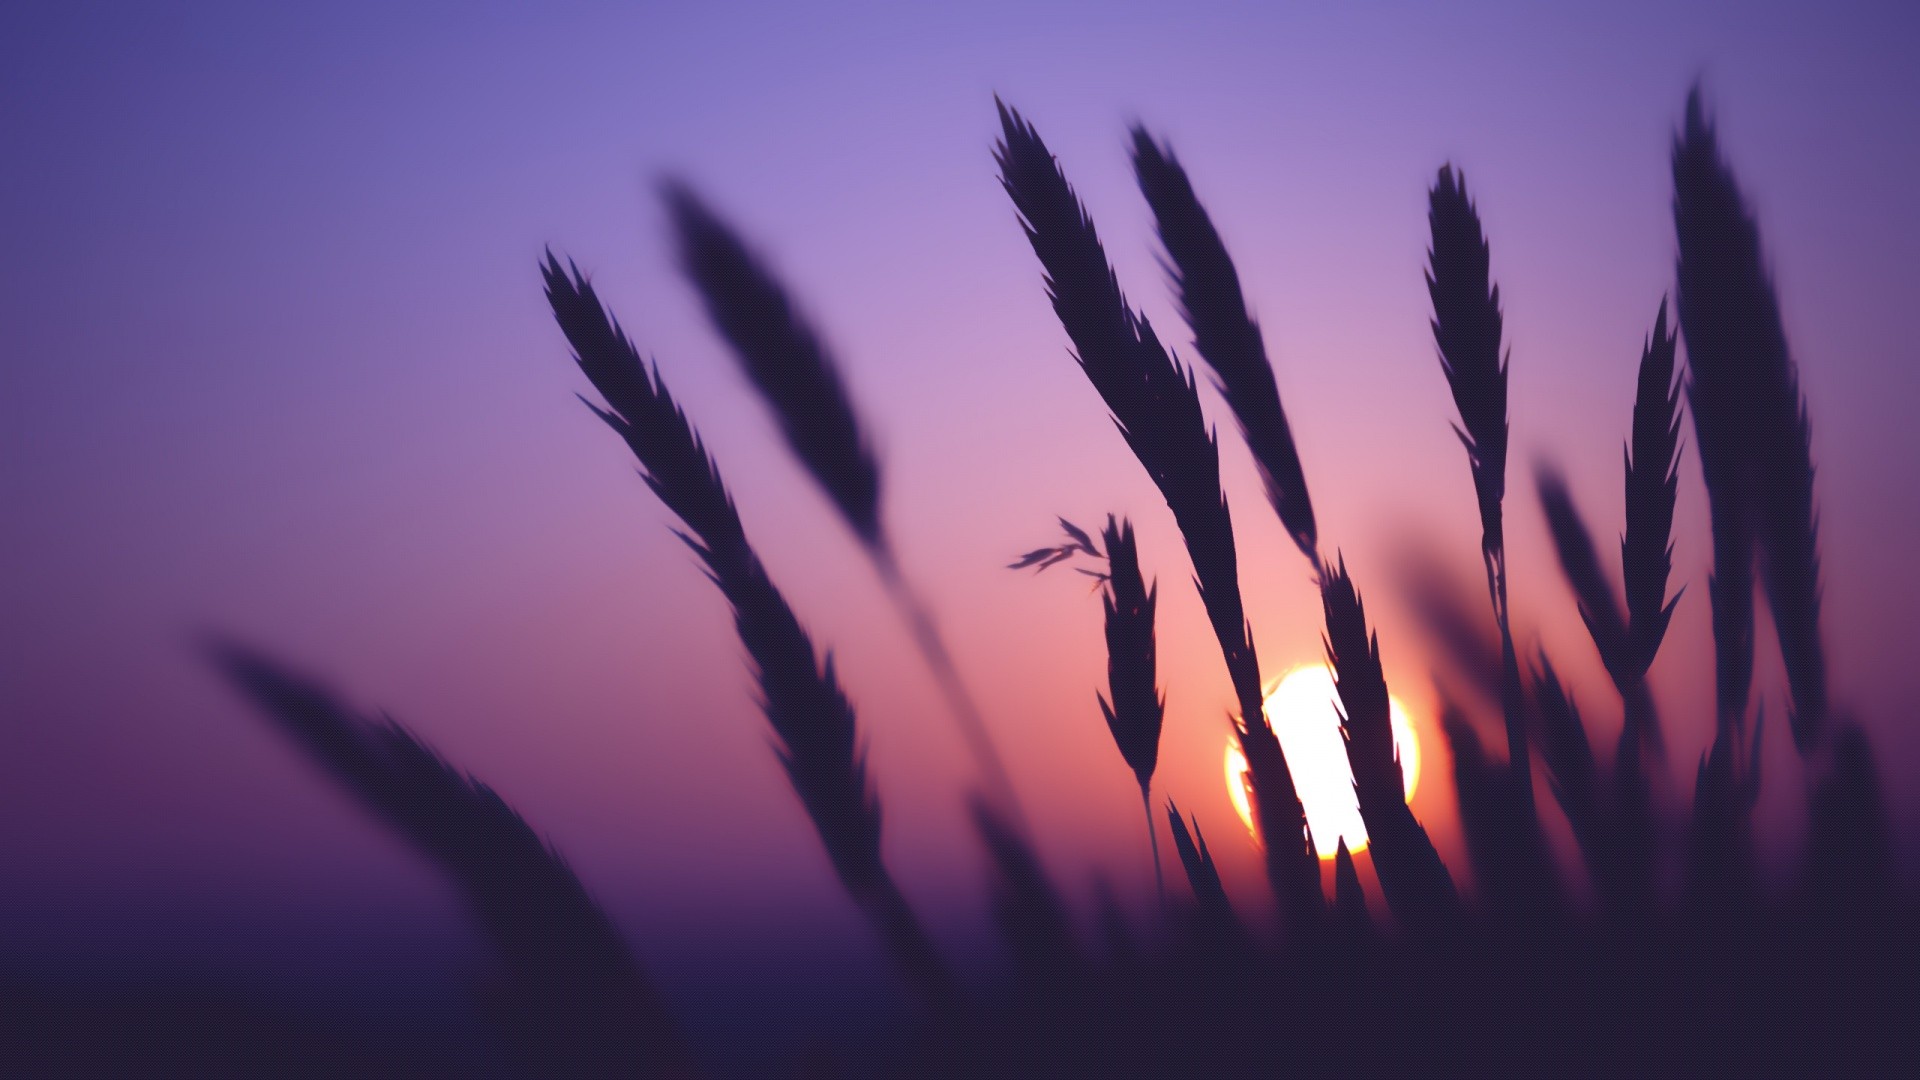 General 1920x1080 spikelets sunset nature silhouette sunlight plants outdoors wheat